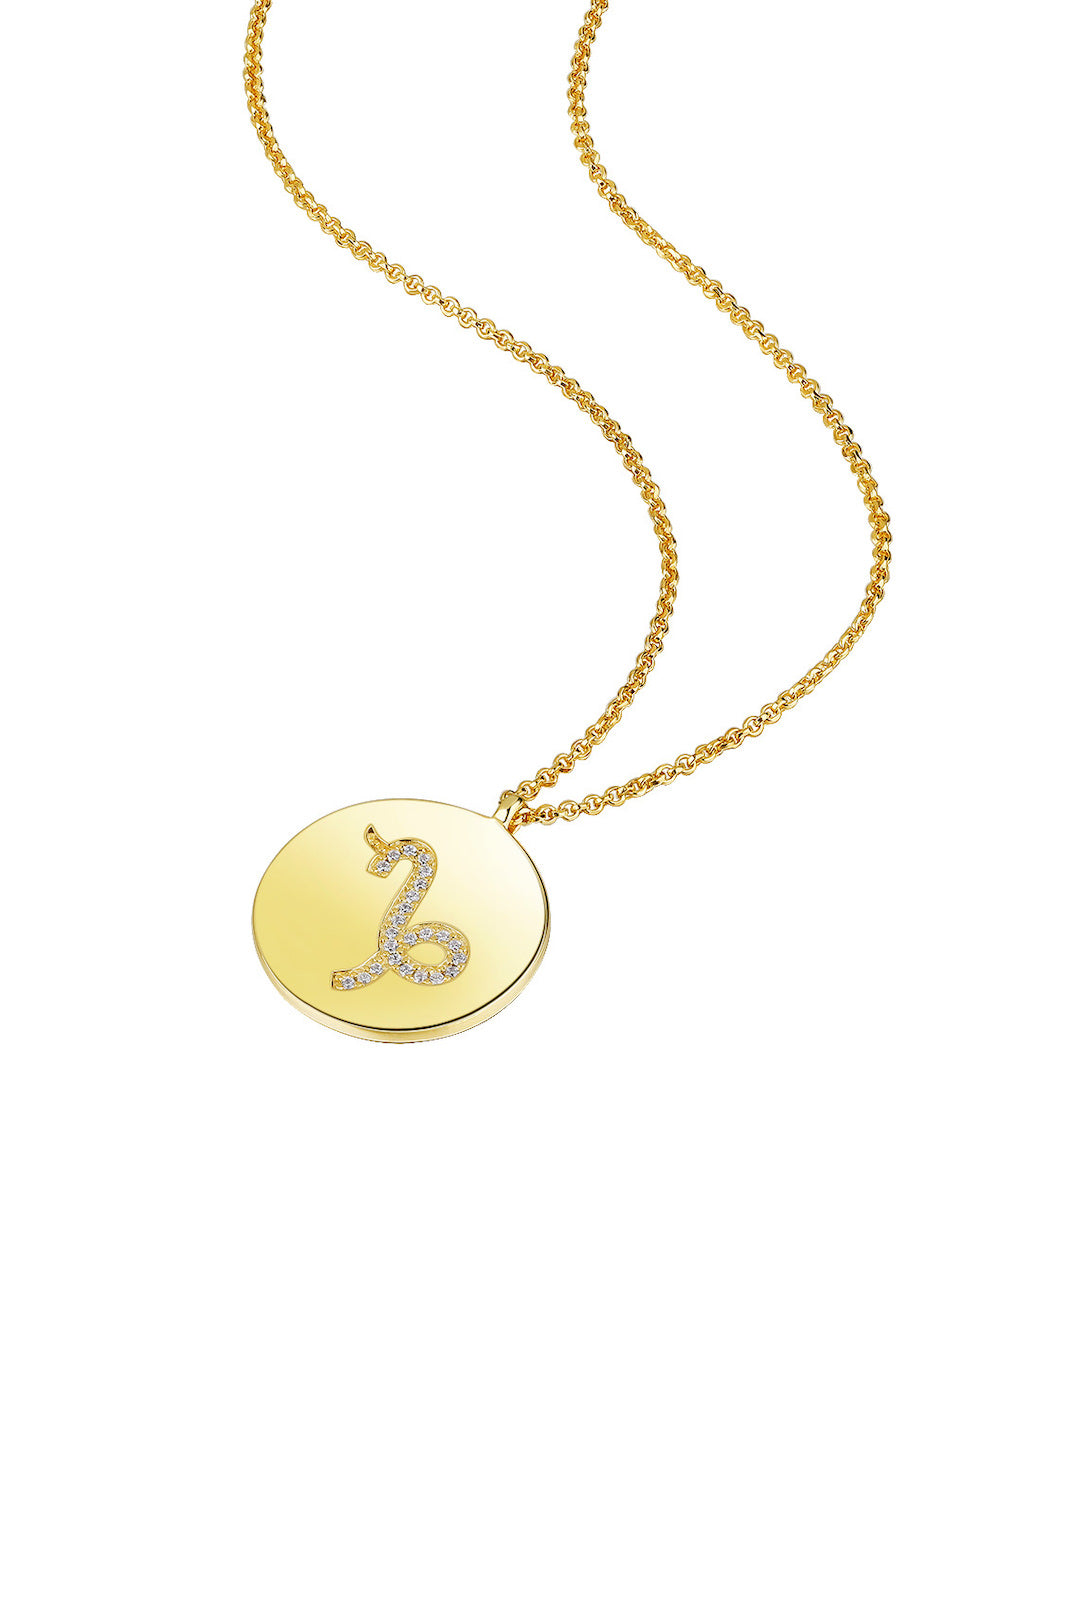 Gold Plated Silver Zodiac Necklace - Capricorn Side View